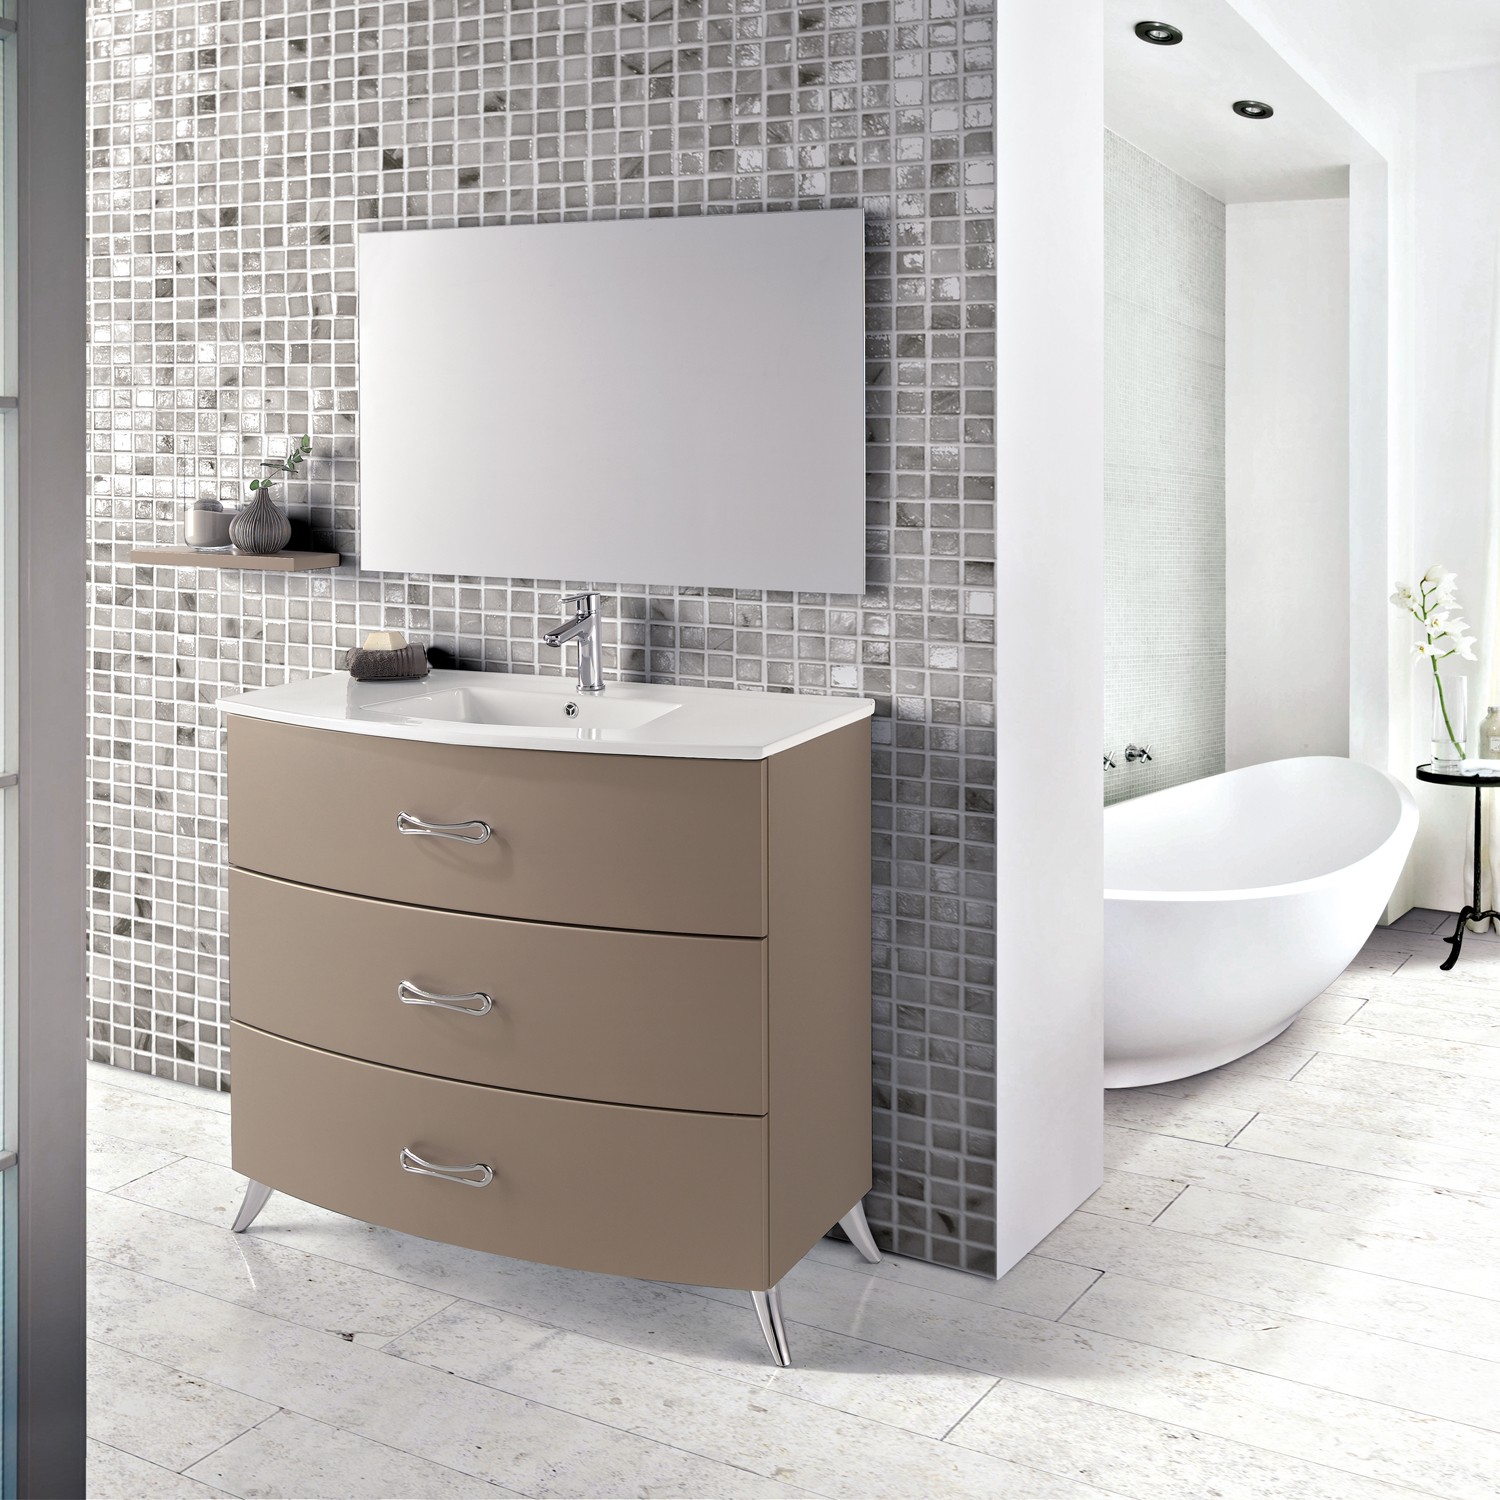 Eviva Bari 32 Champaign Freestanding Bathroom Vanity With Integrated White Porcelain Sink Decors Us